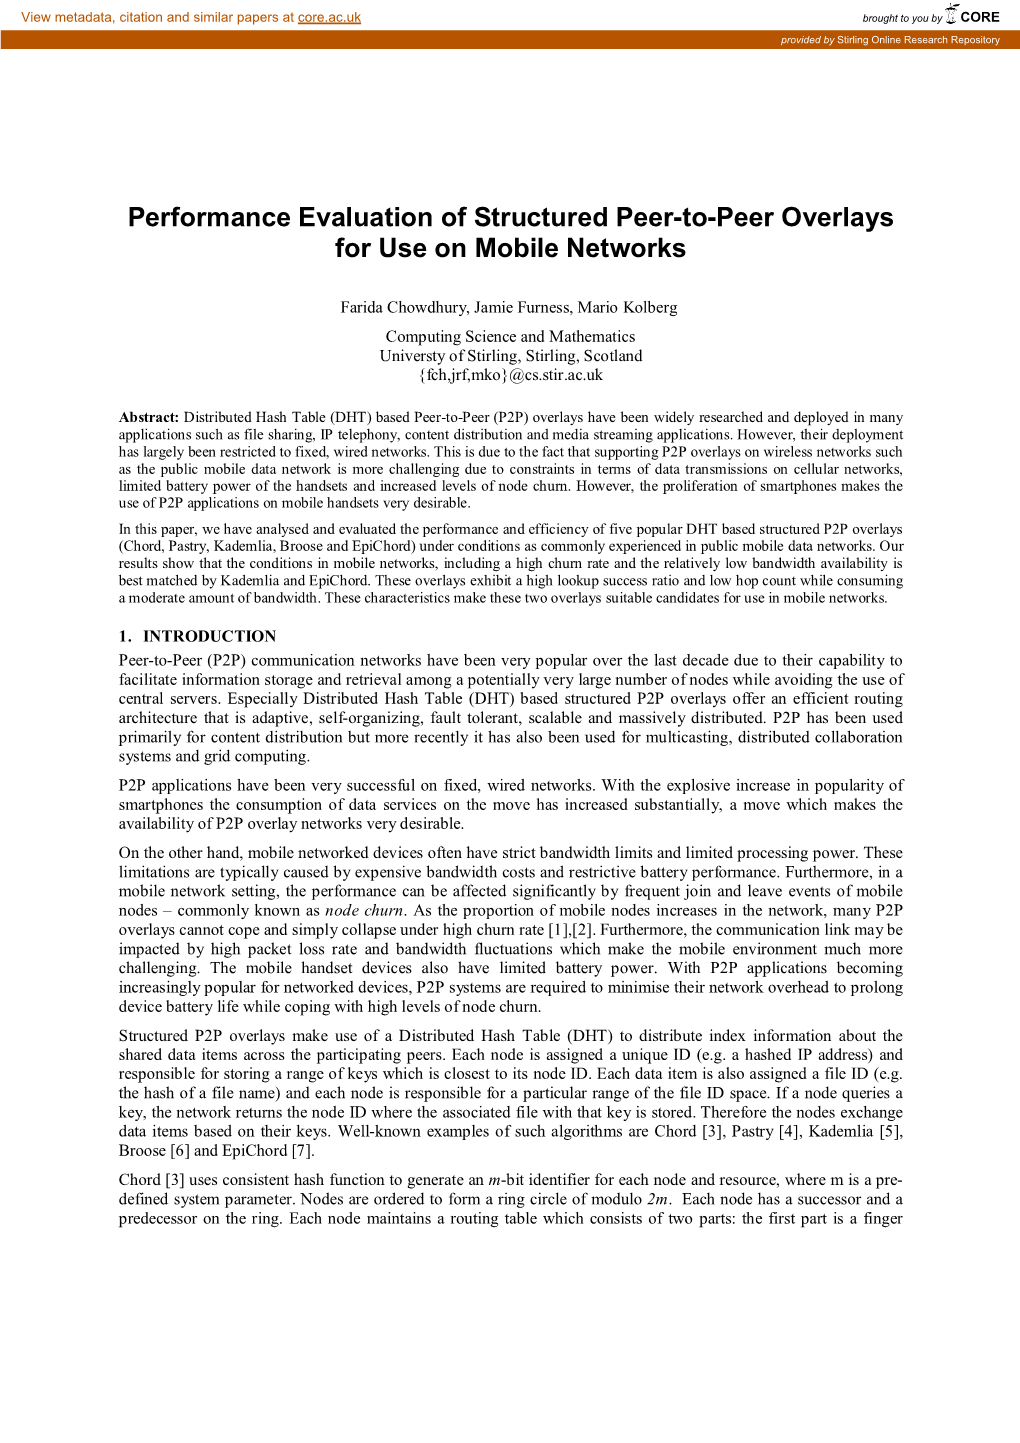 Performance Evaluation of Structured Peer-To-Peer Overlays for Use on Mobile Networks